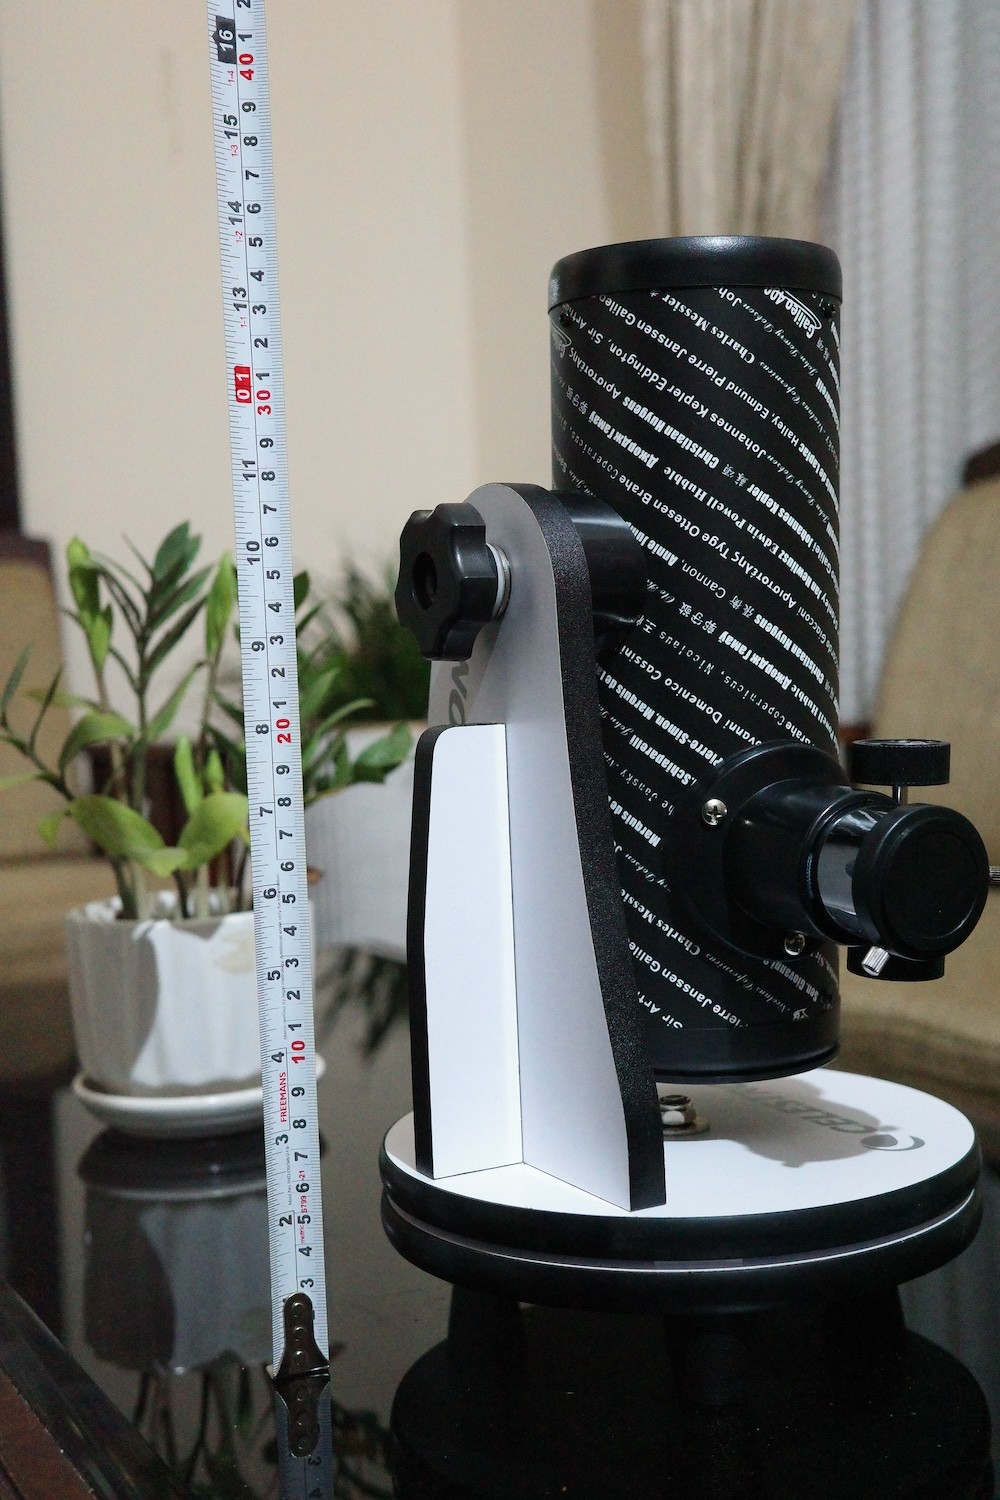 Firstscope besides a scale to measure length